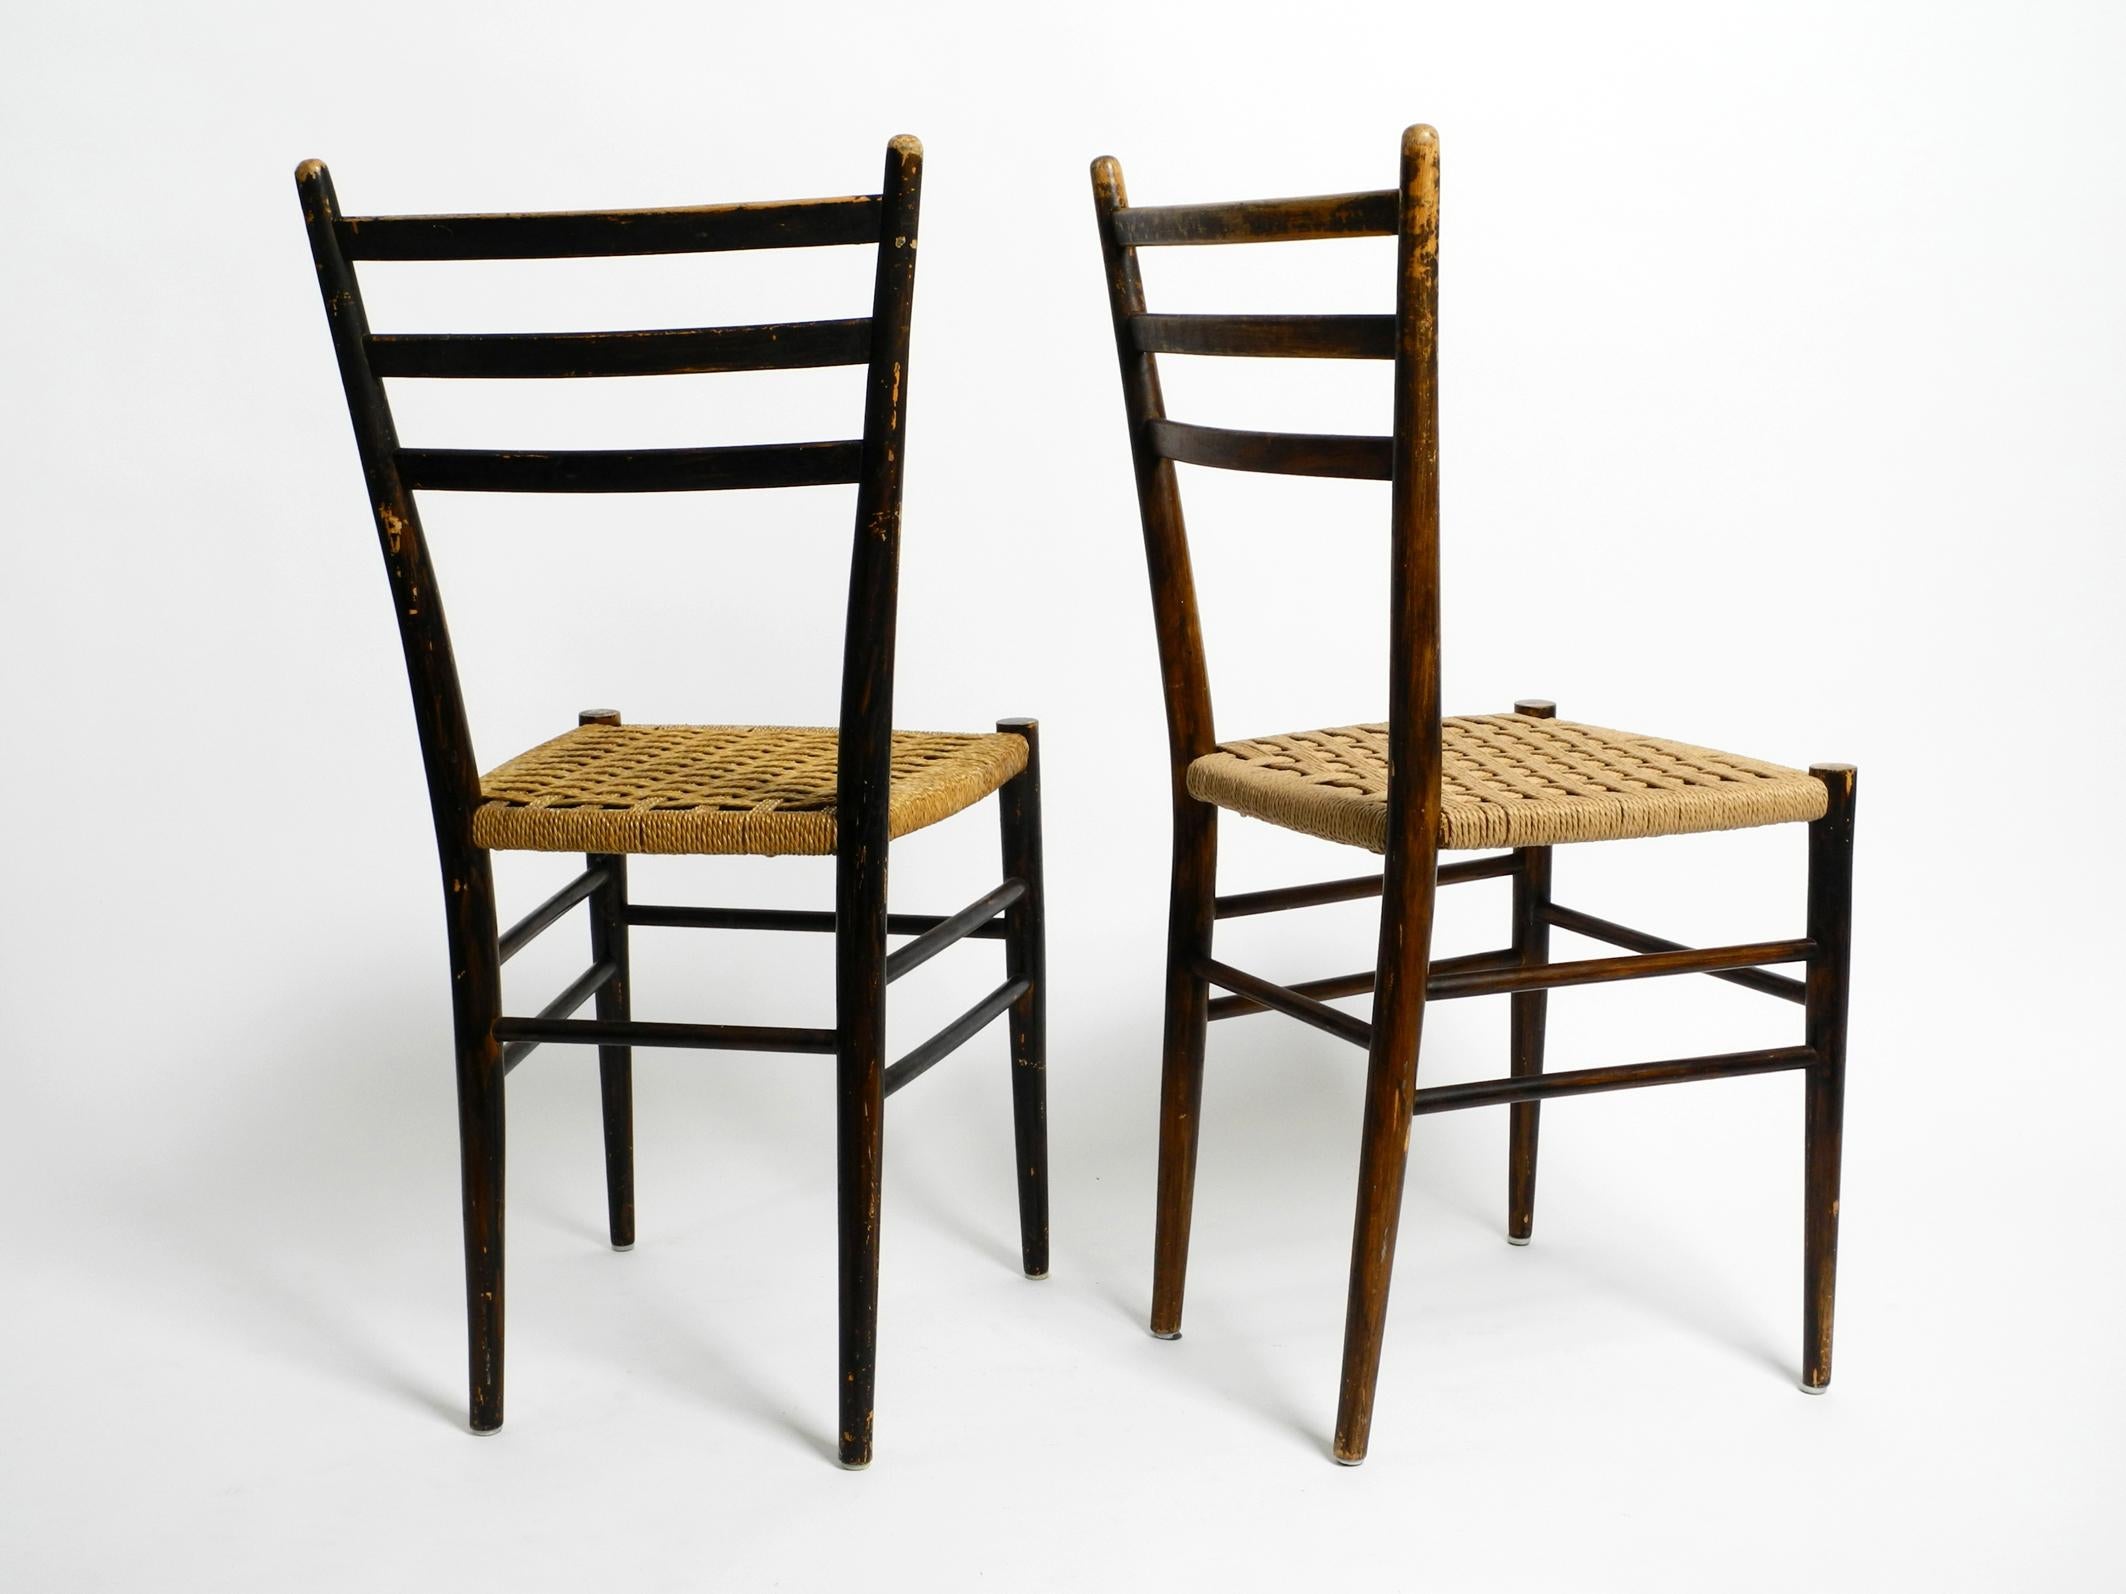 wooden chair with wicker seat